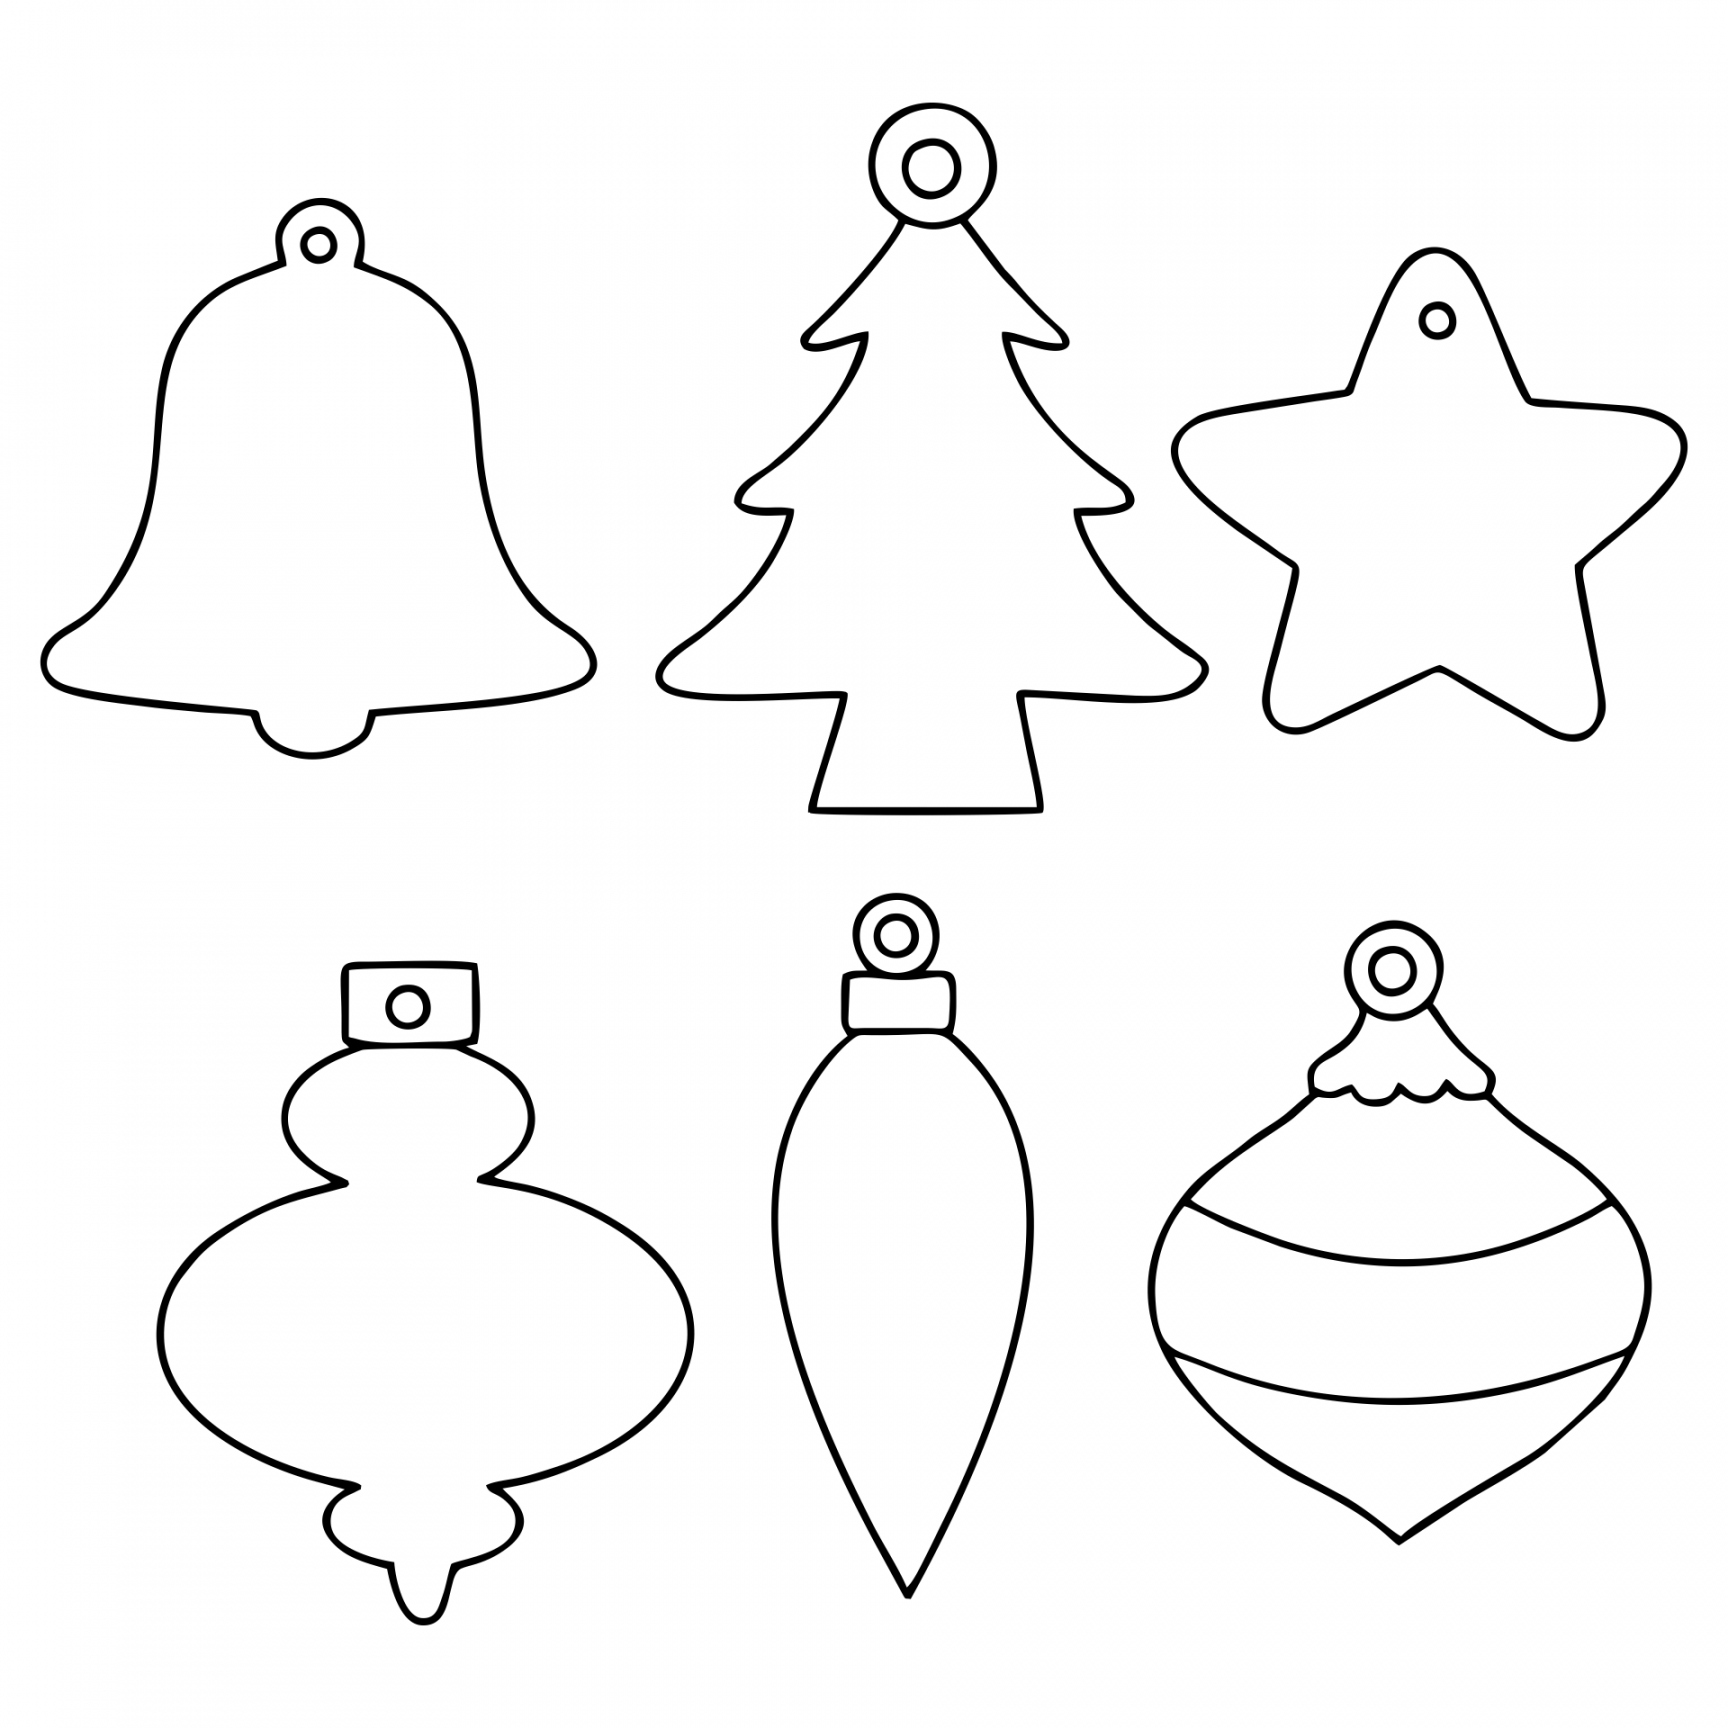 Best Christmas Printable Ornament Shapes - printablee - Christmas Ornament Shapes